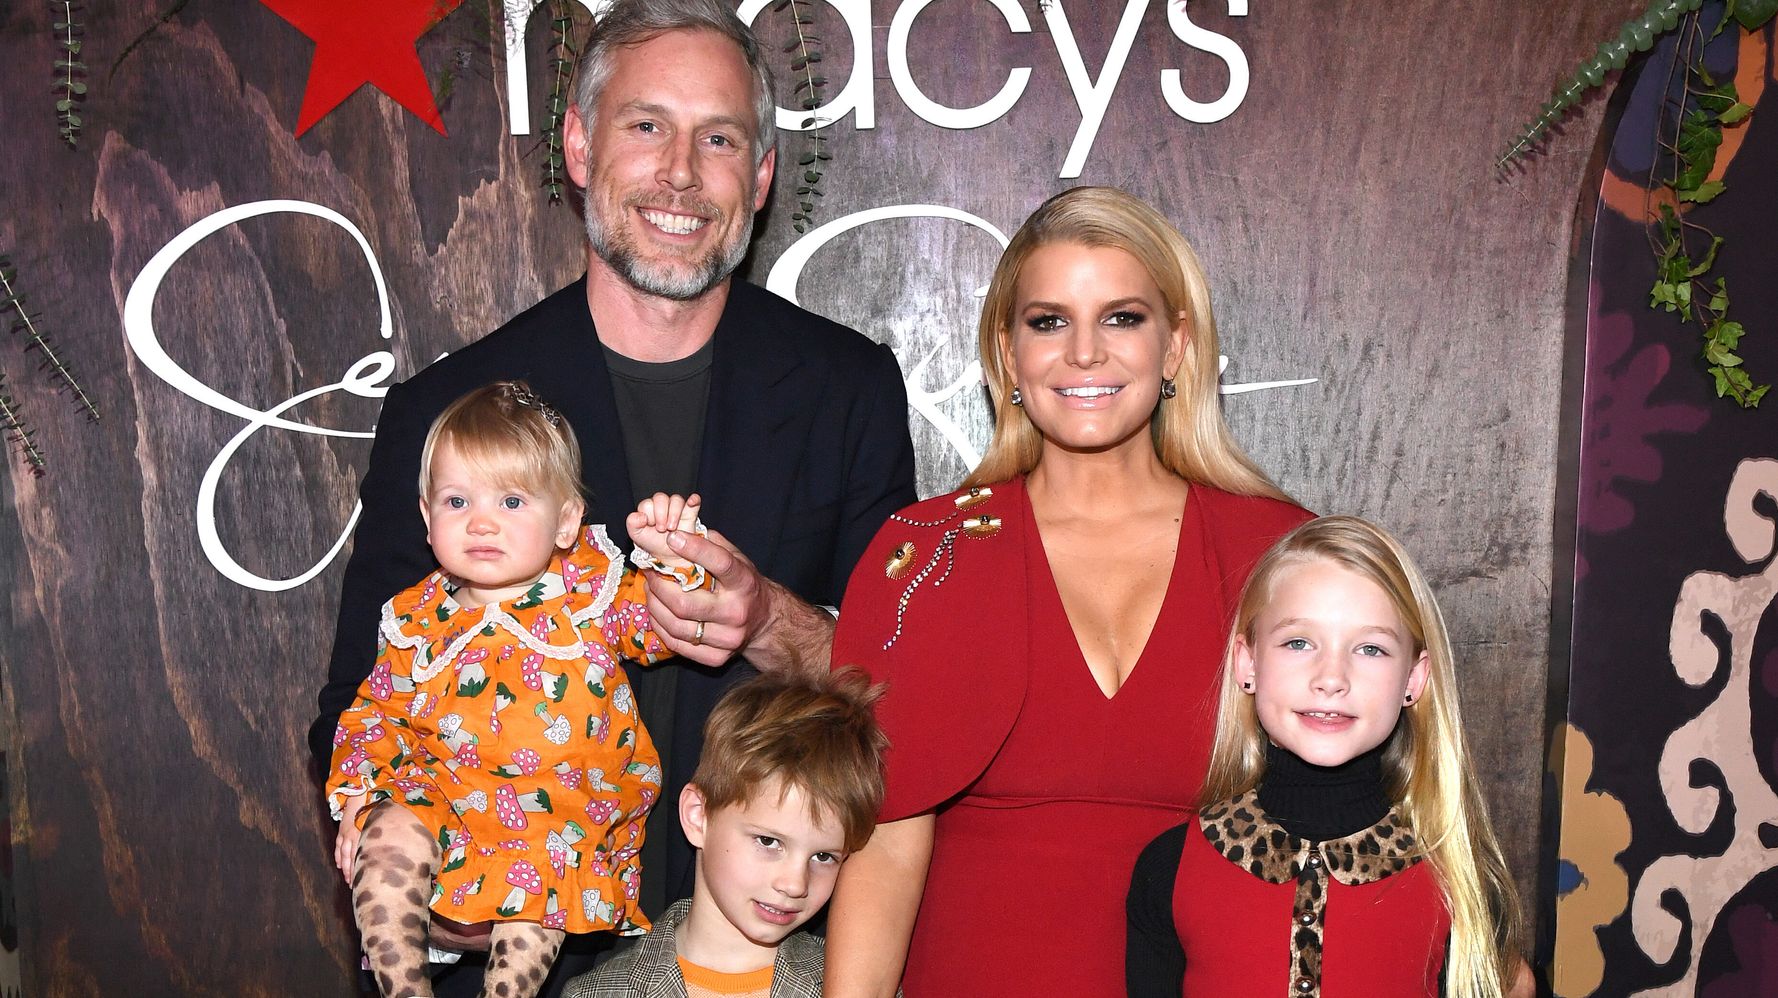 Jessica Simpson: Eric Johnson Is 'The One For Me Right Now